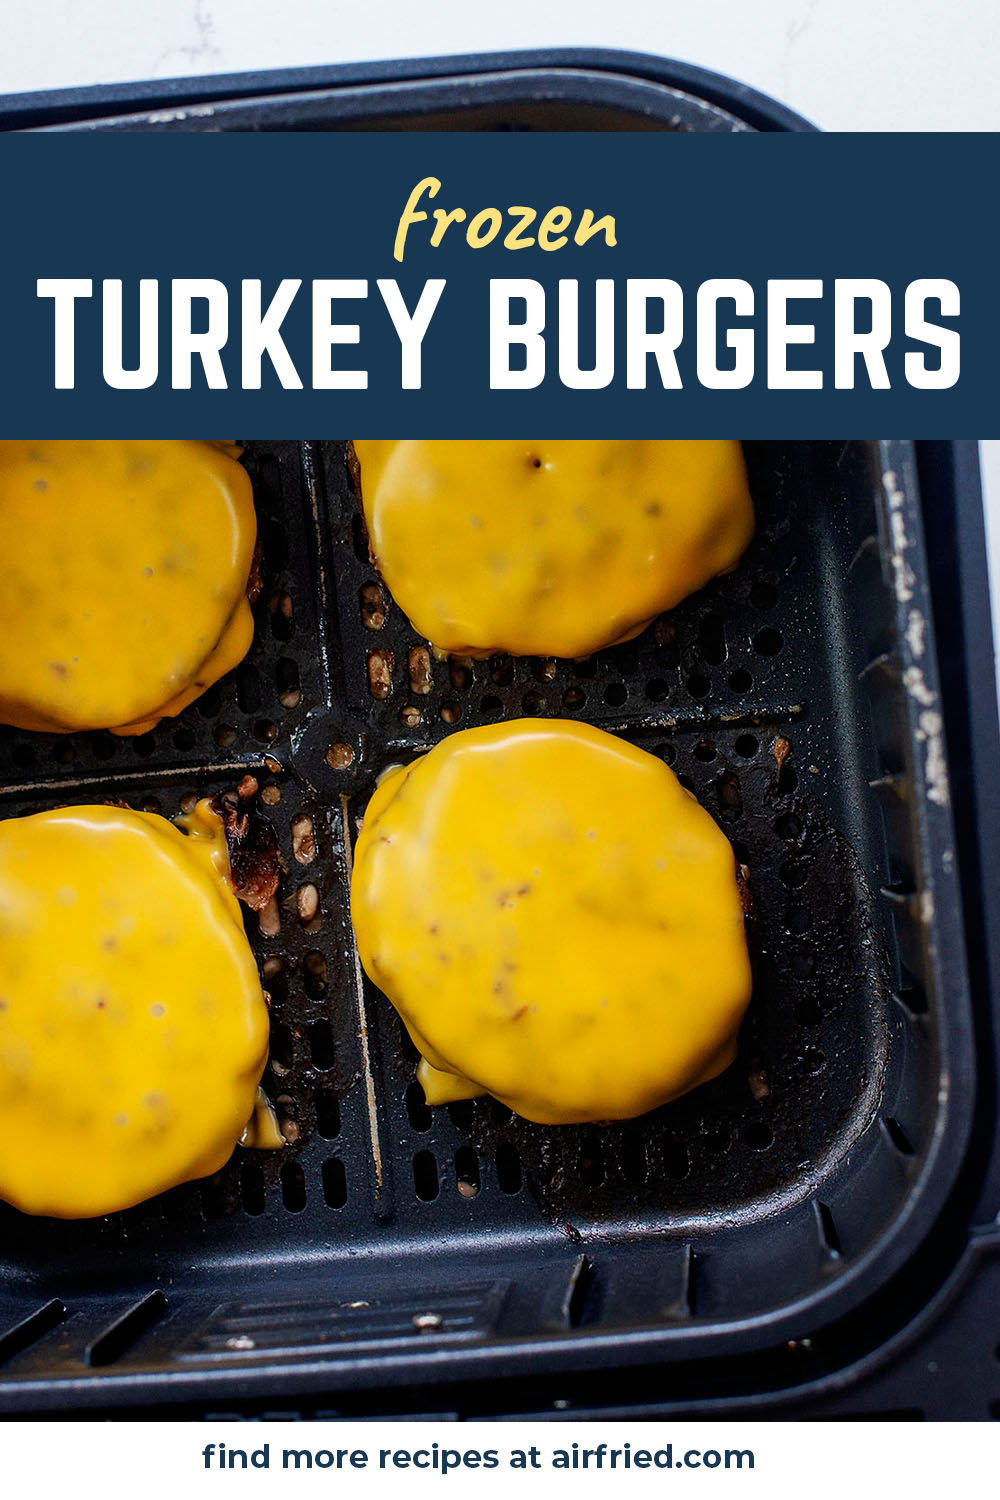 These frozen turkey burgers went straight from the freezer to the air fryer and the results were great!